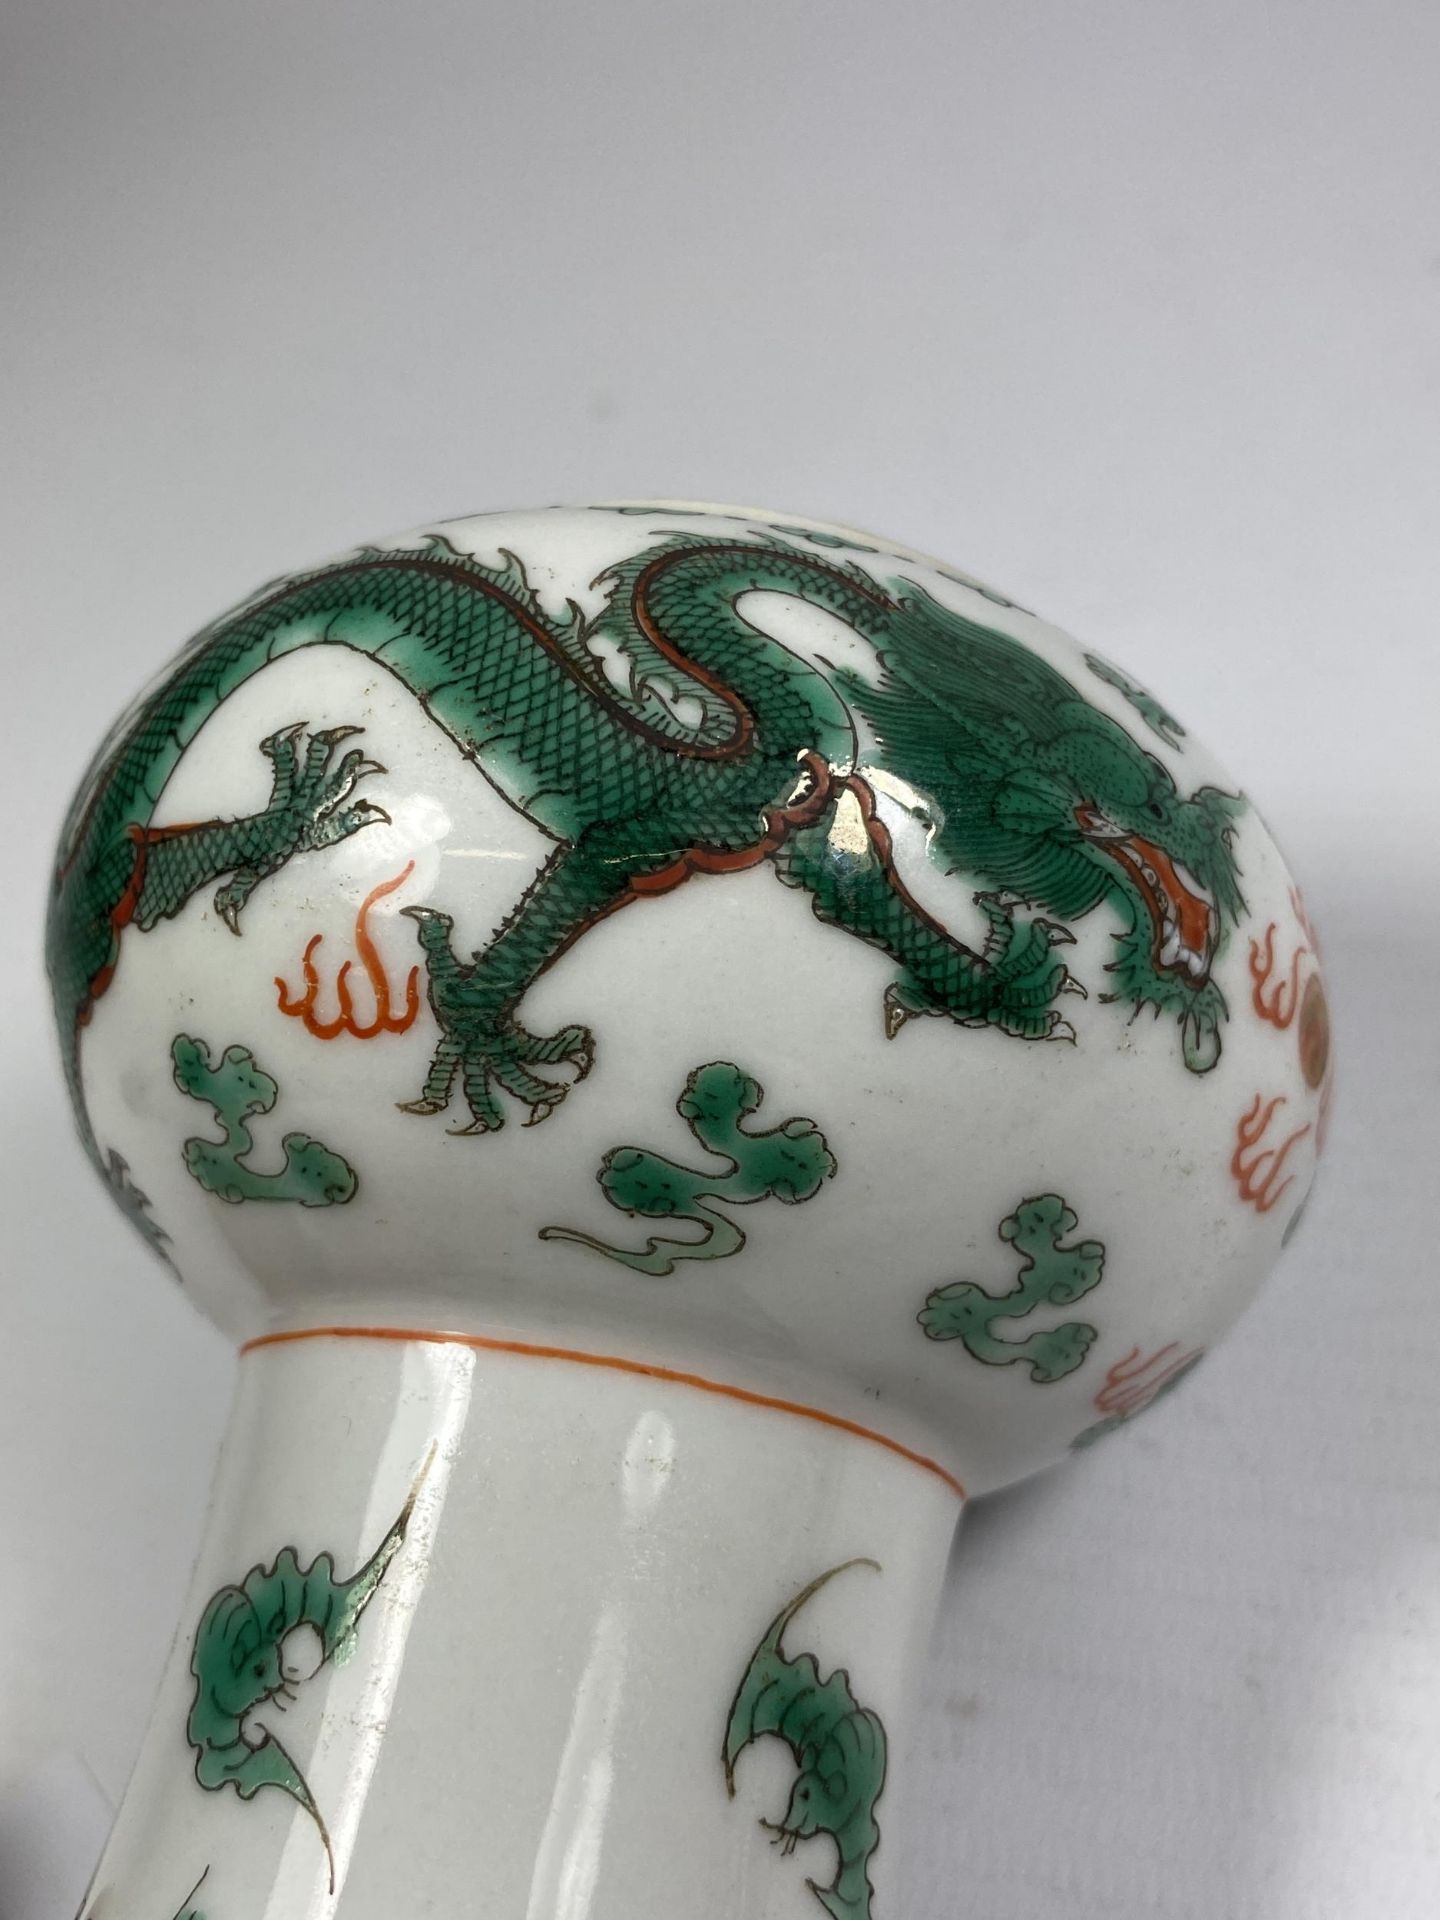 A CHINESE FAMILLE VERTE STEM CUP / VASE WITH DRAGON CHASING FLAMING PEARL DESIGN, SIX CHARACTER MARK - Image 3 of 4